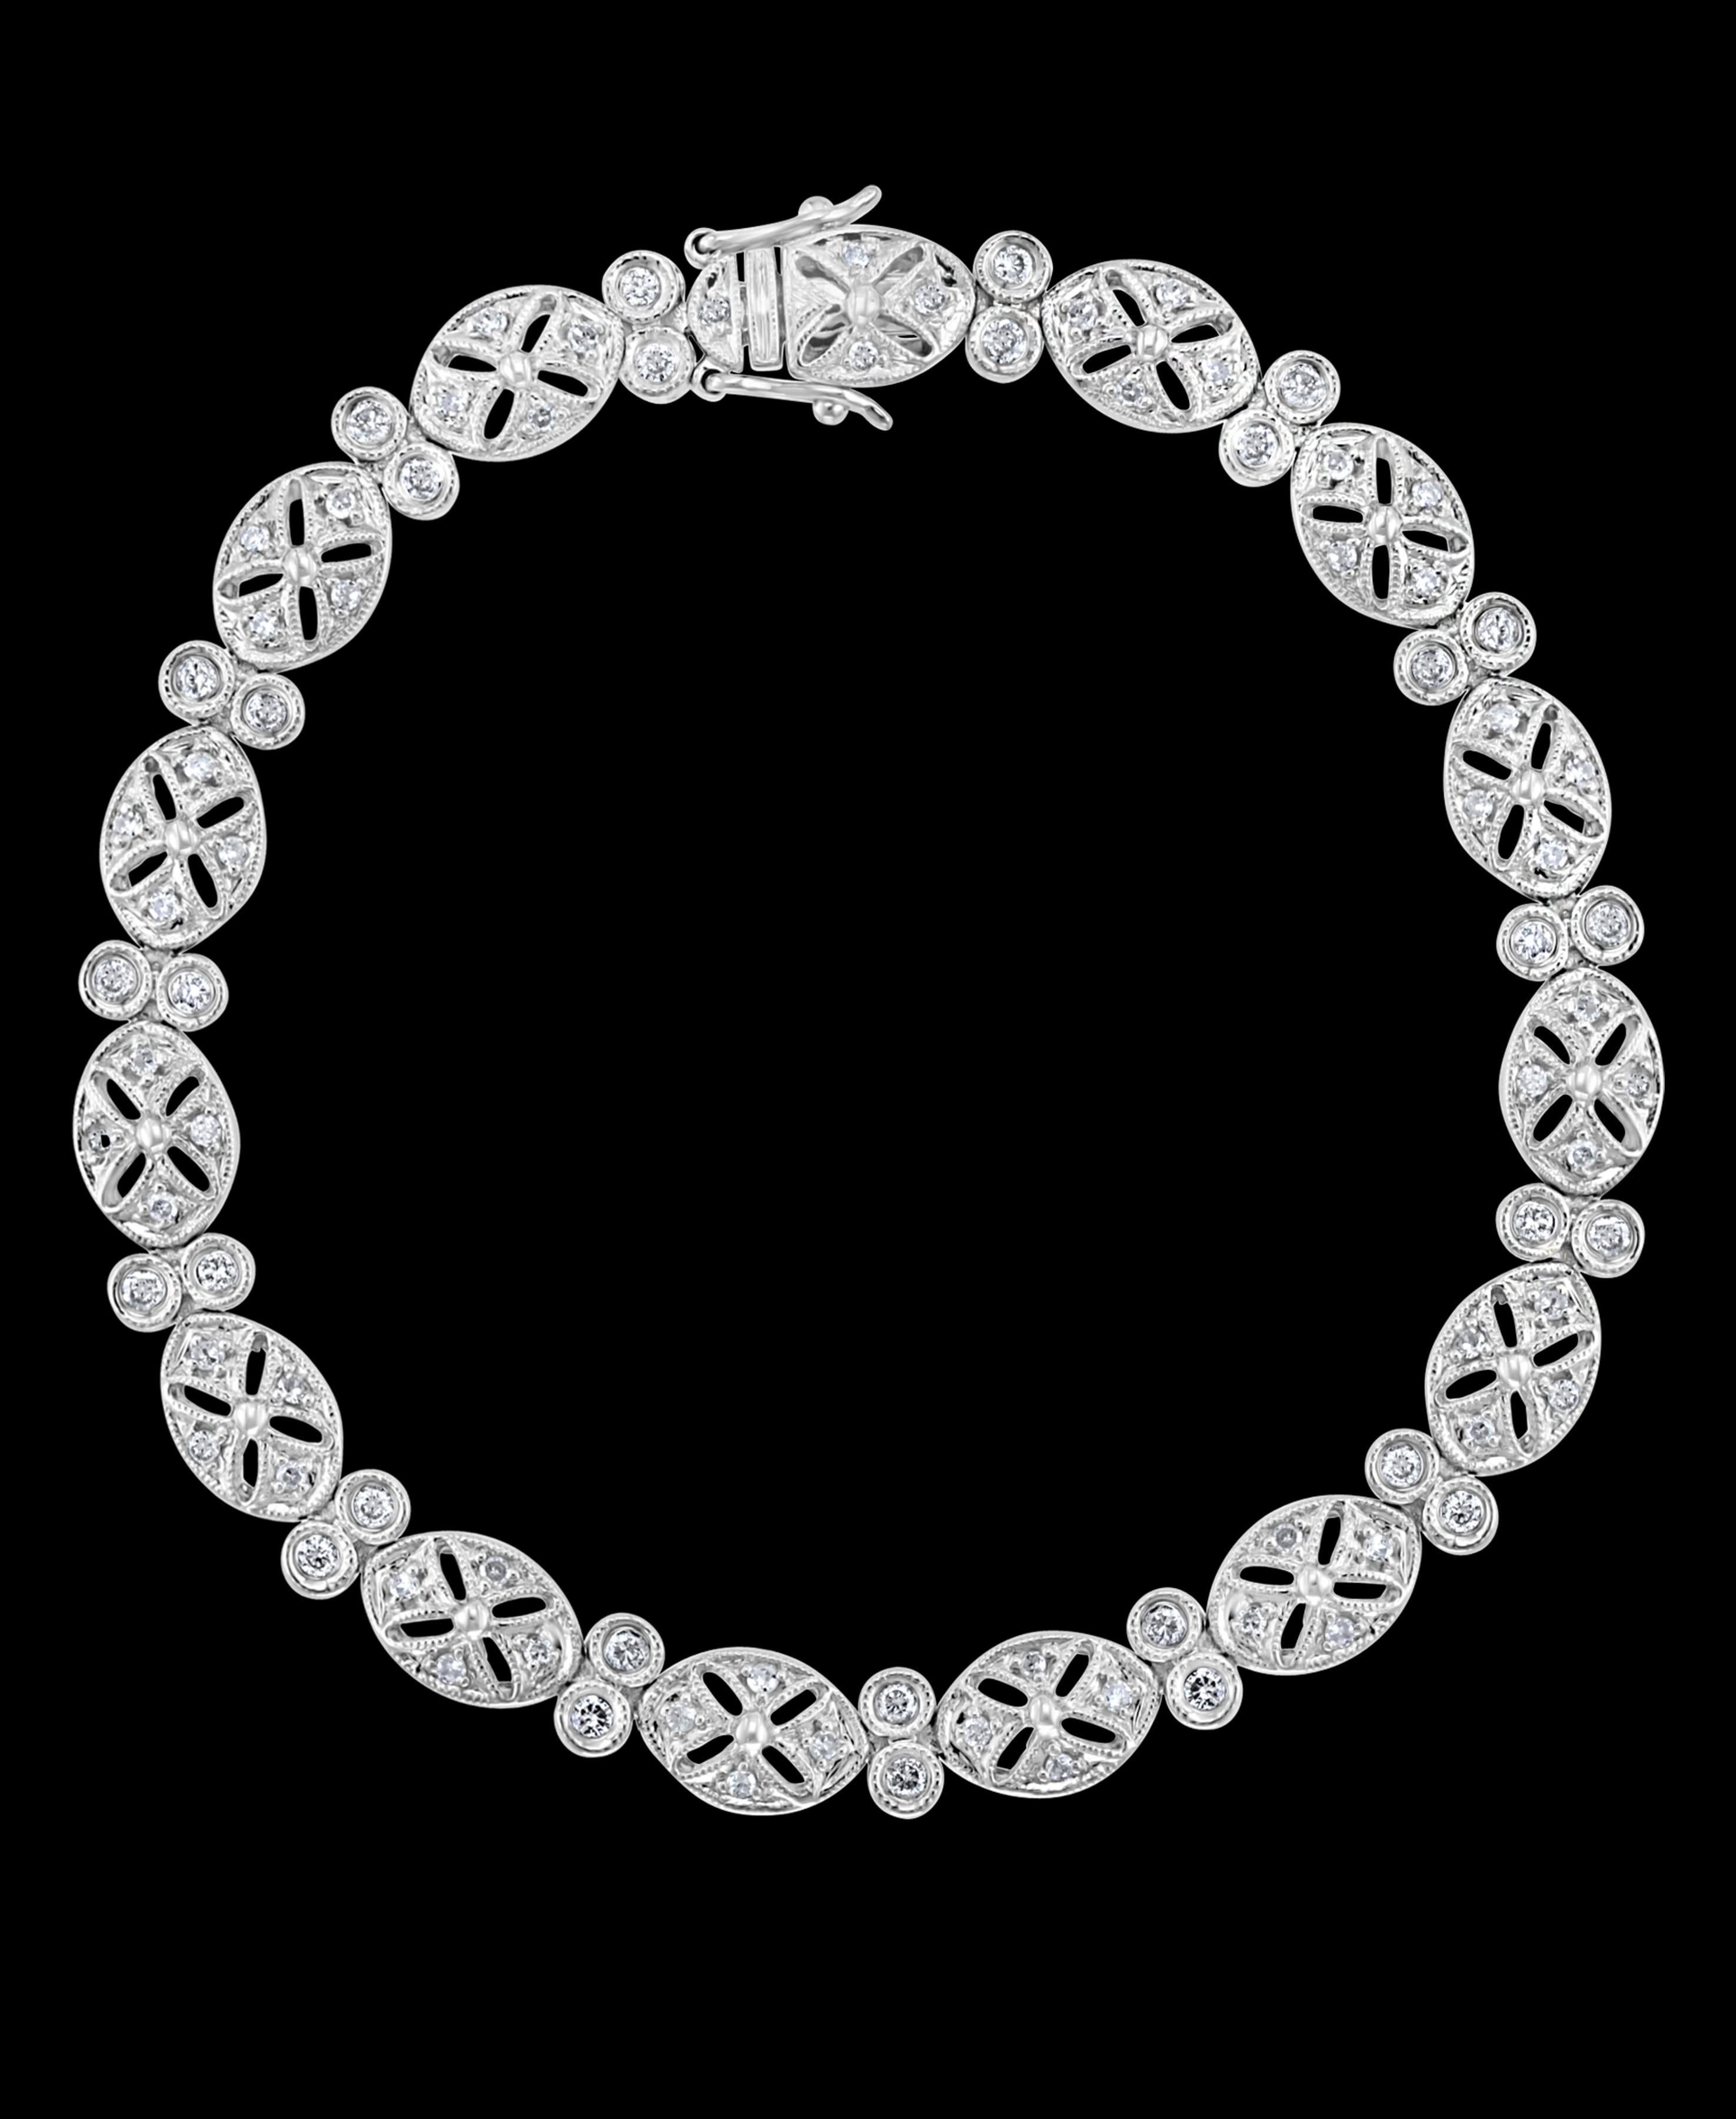 A statement of simple, classic elegance, this 14 karat White Gold  Bracelet with  Diamond  from signature collection. The interlocking  links of diamonds   provide flexibility with a fabric-like movement. This makes for a very comfortable, wearable